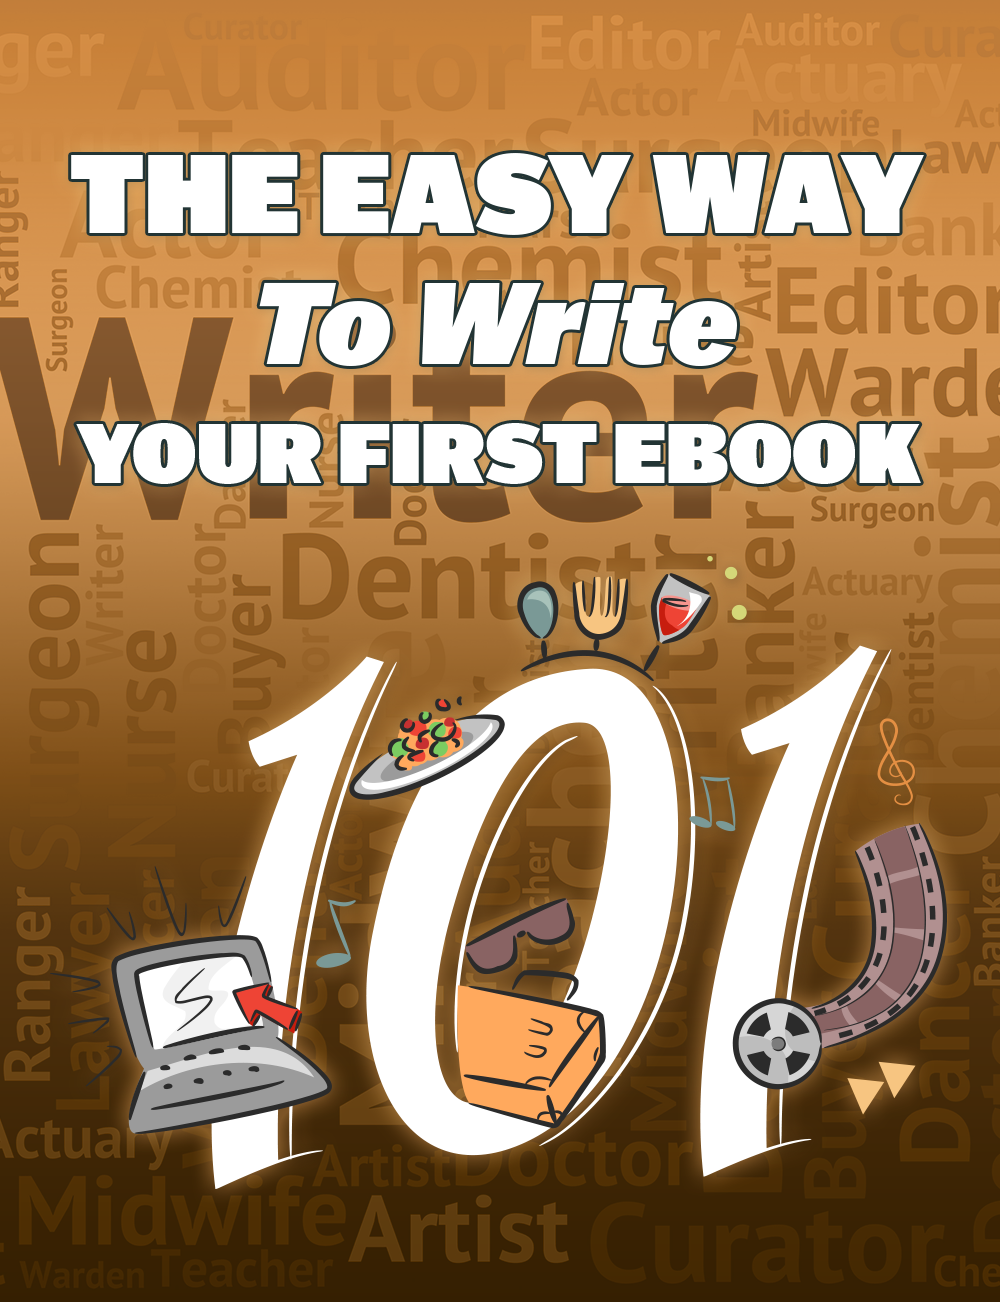 GET STARTED WRITING YOUR 1ST EBOOK